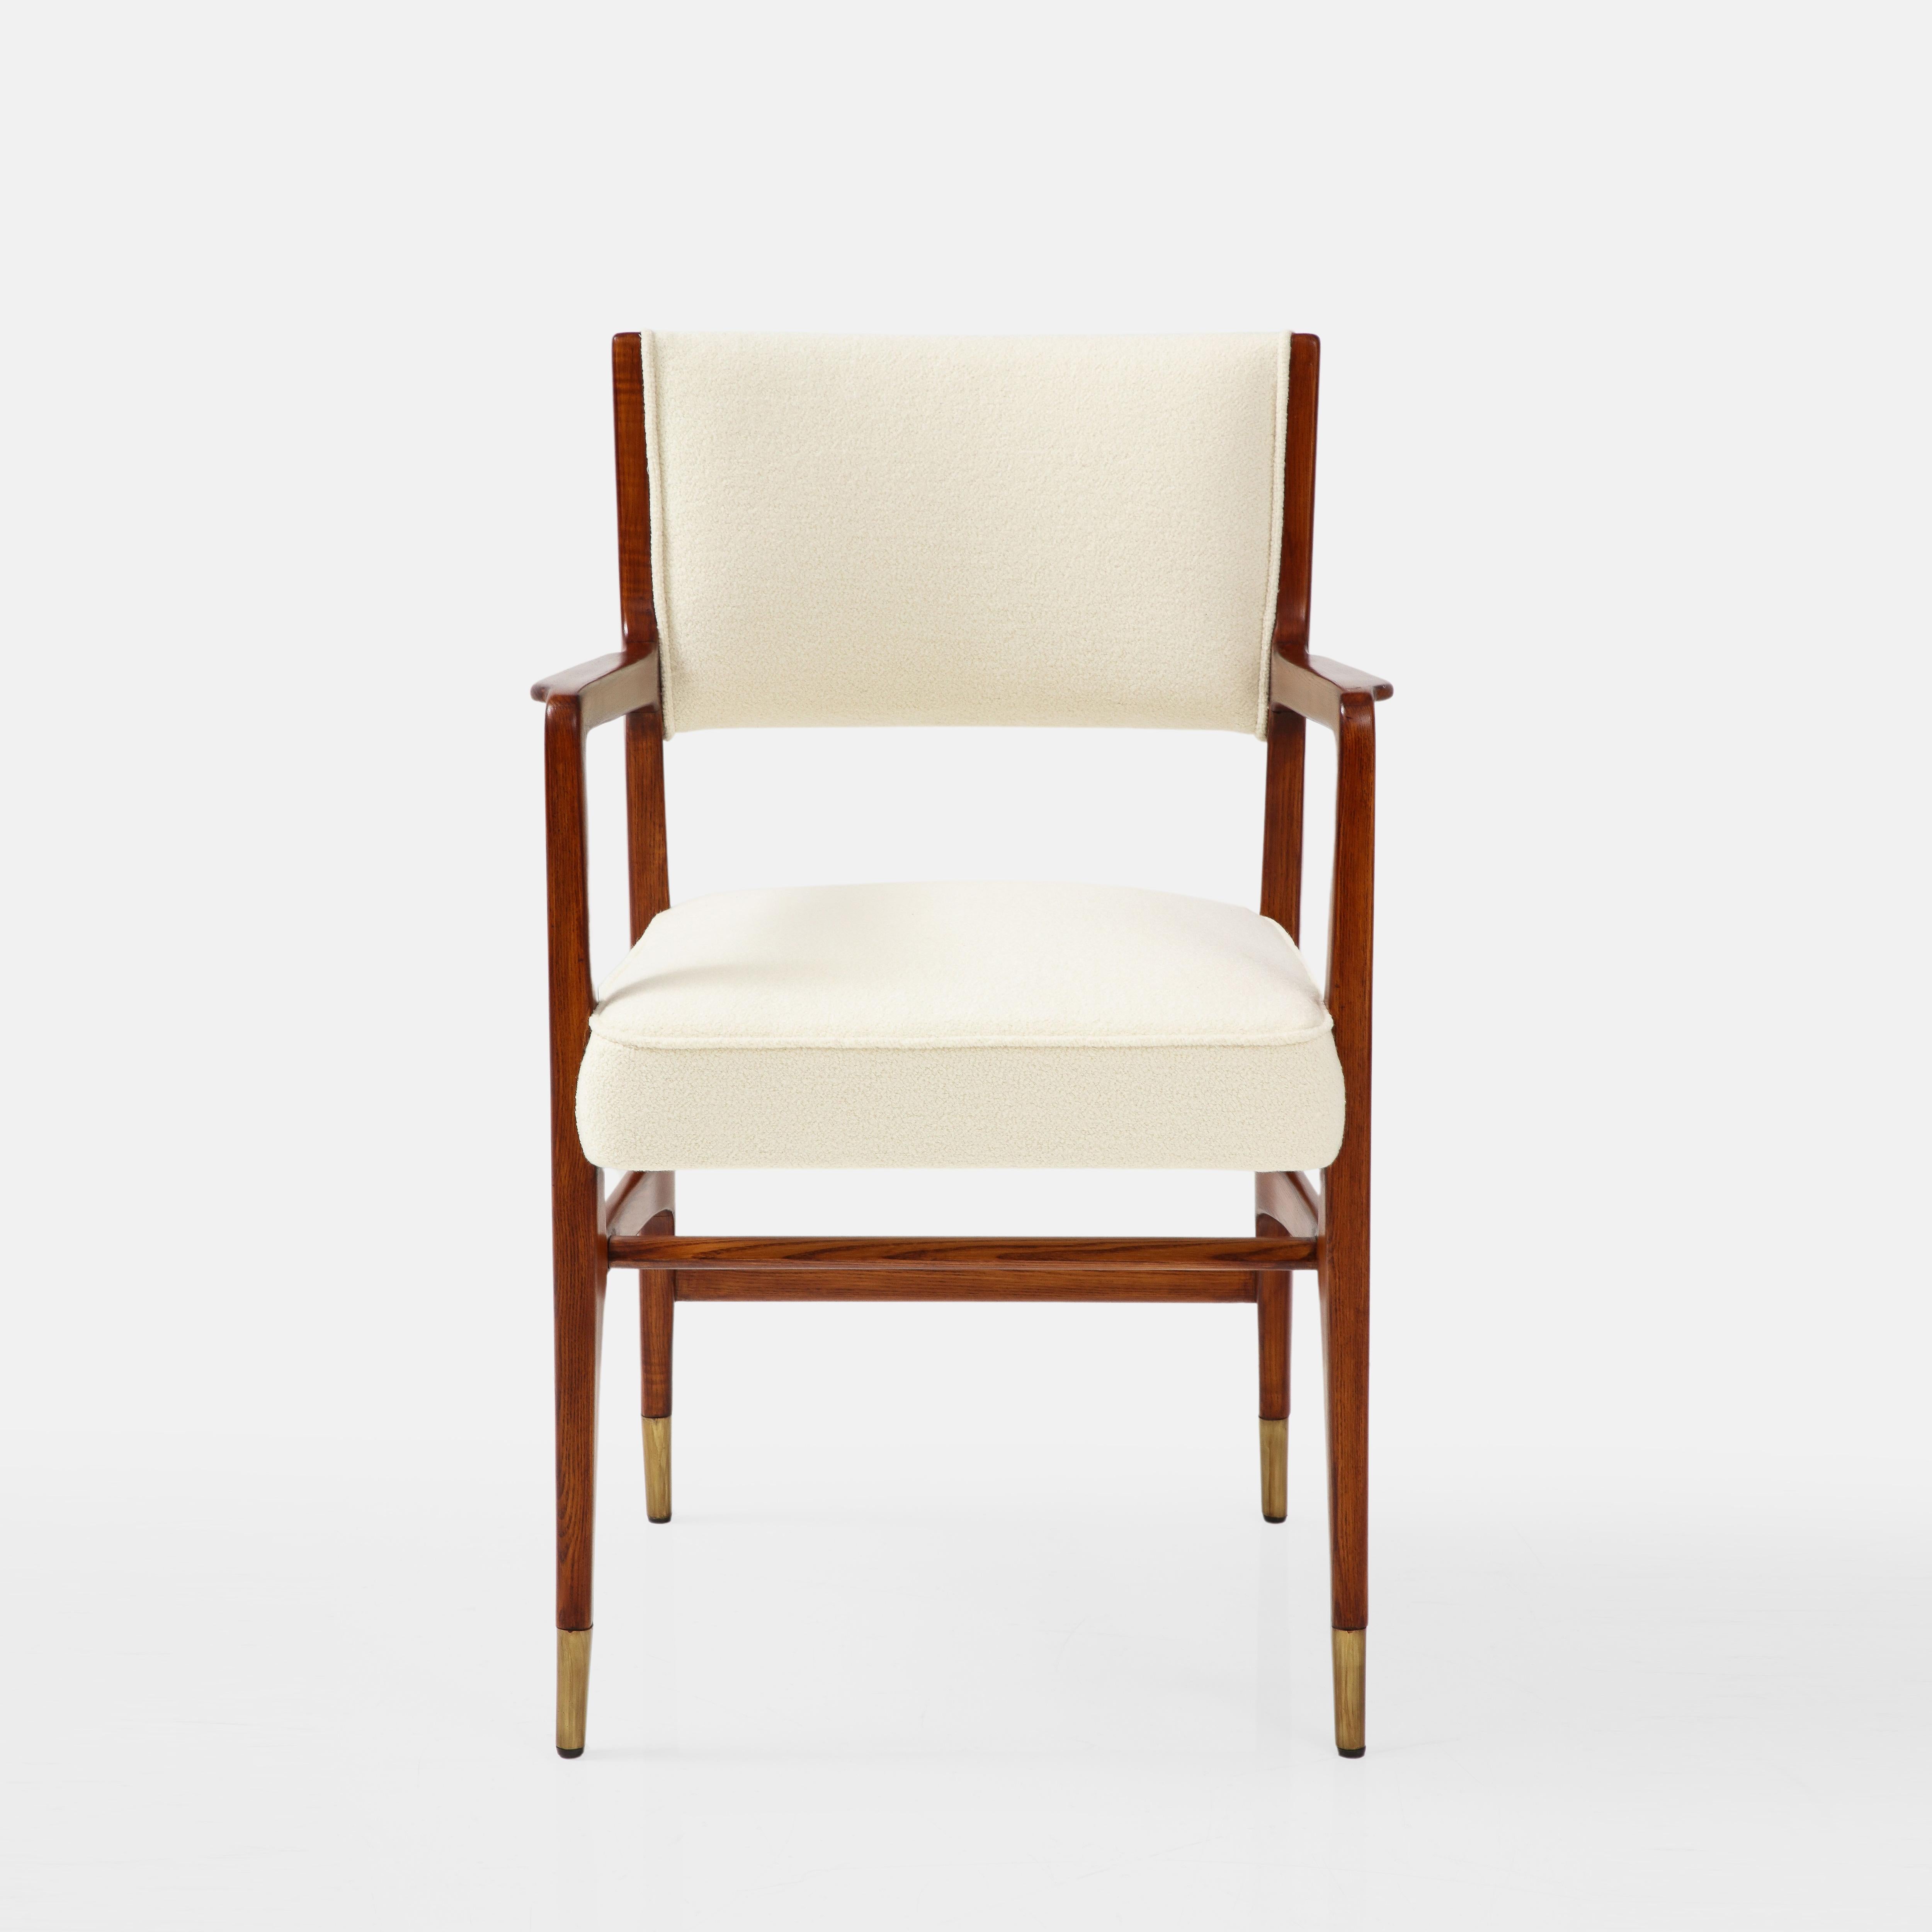 Mid-20th Century Gio Ponti for Cassina Rare Set of 4 Dining Chairs Model 110 in Ivory Bouclé